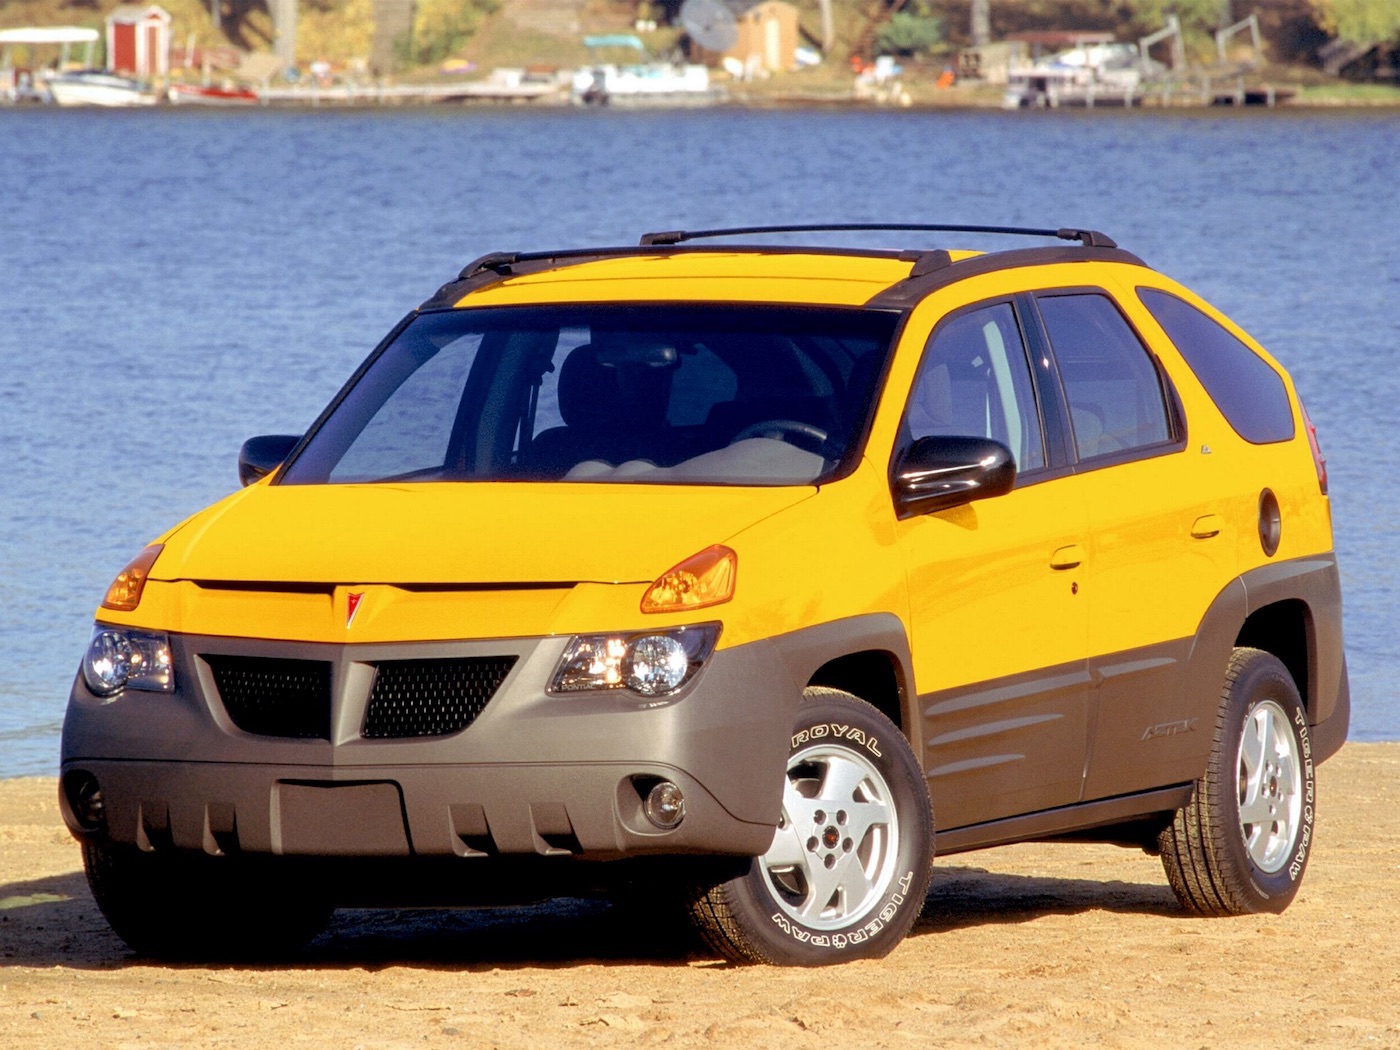 Pontiac Aztek - How One of the Worst Cars in History Was Born - Dyler